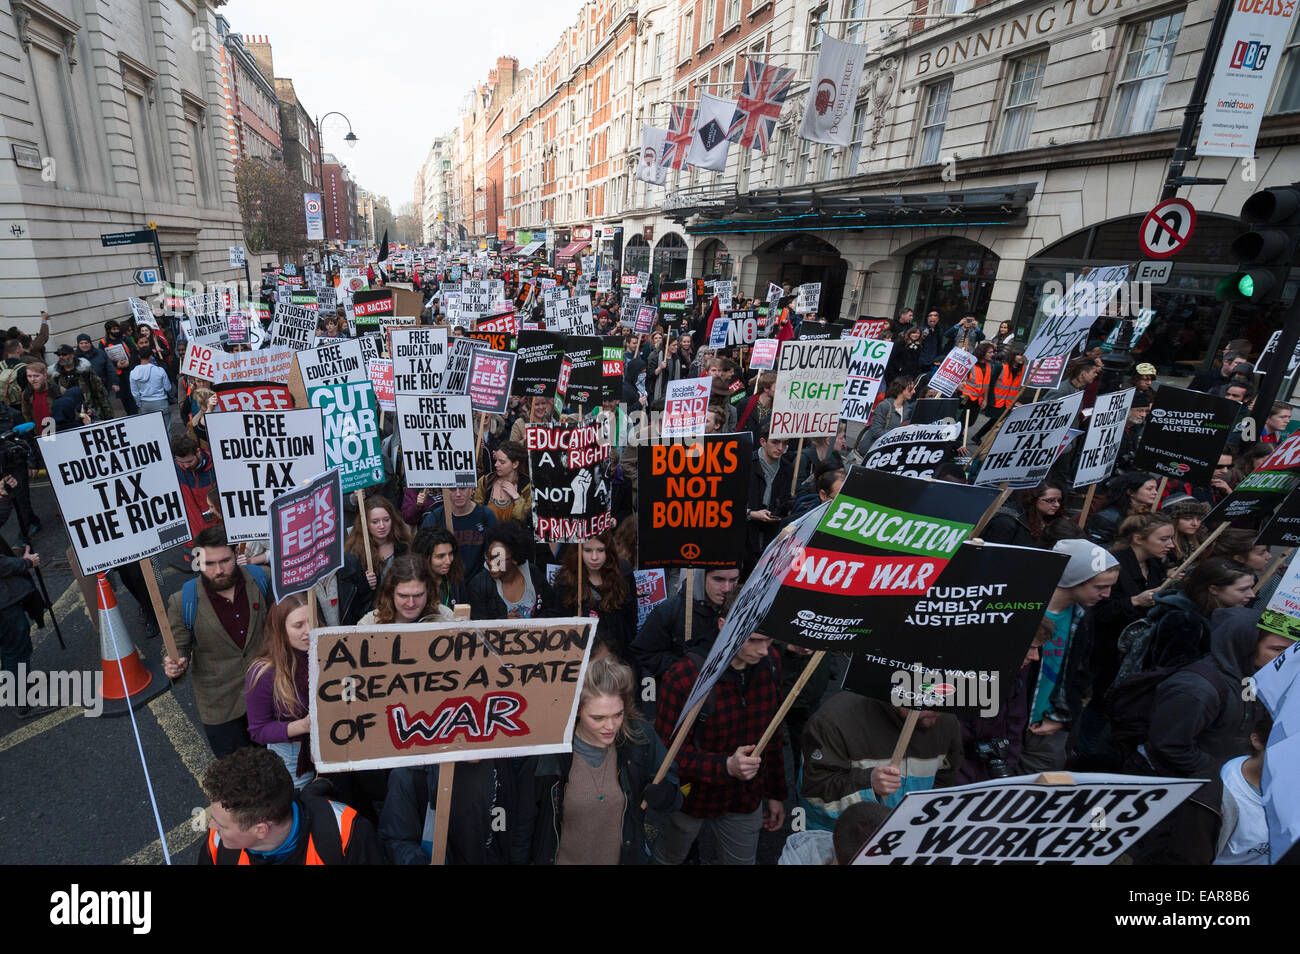 Southampton Row, London, UK. 19th November 2014. Thousands of students take part in a protest march along Southampton Row in central London. The demonstration against tuition fees, education cuts and debt eventually made its way to Parliament Square. Credit:  Lee Thomas/Alamy Live News Stock Photo